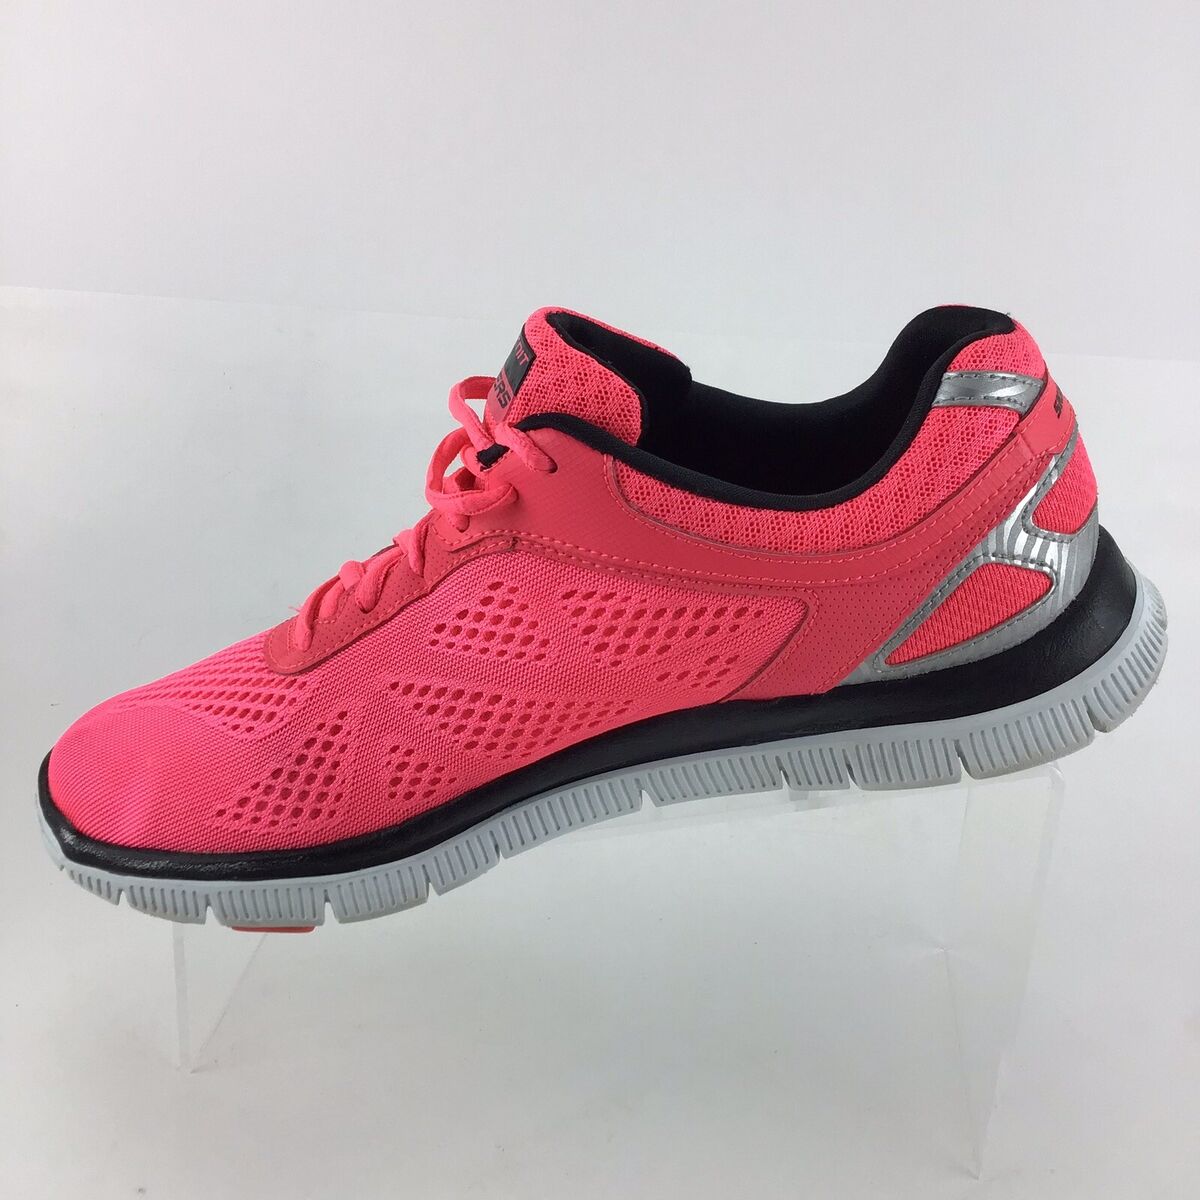 Skechers Sole Running Lace Up Pink Sneakers Womens 9.5 Shoes B2